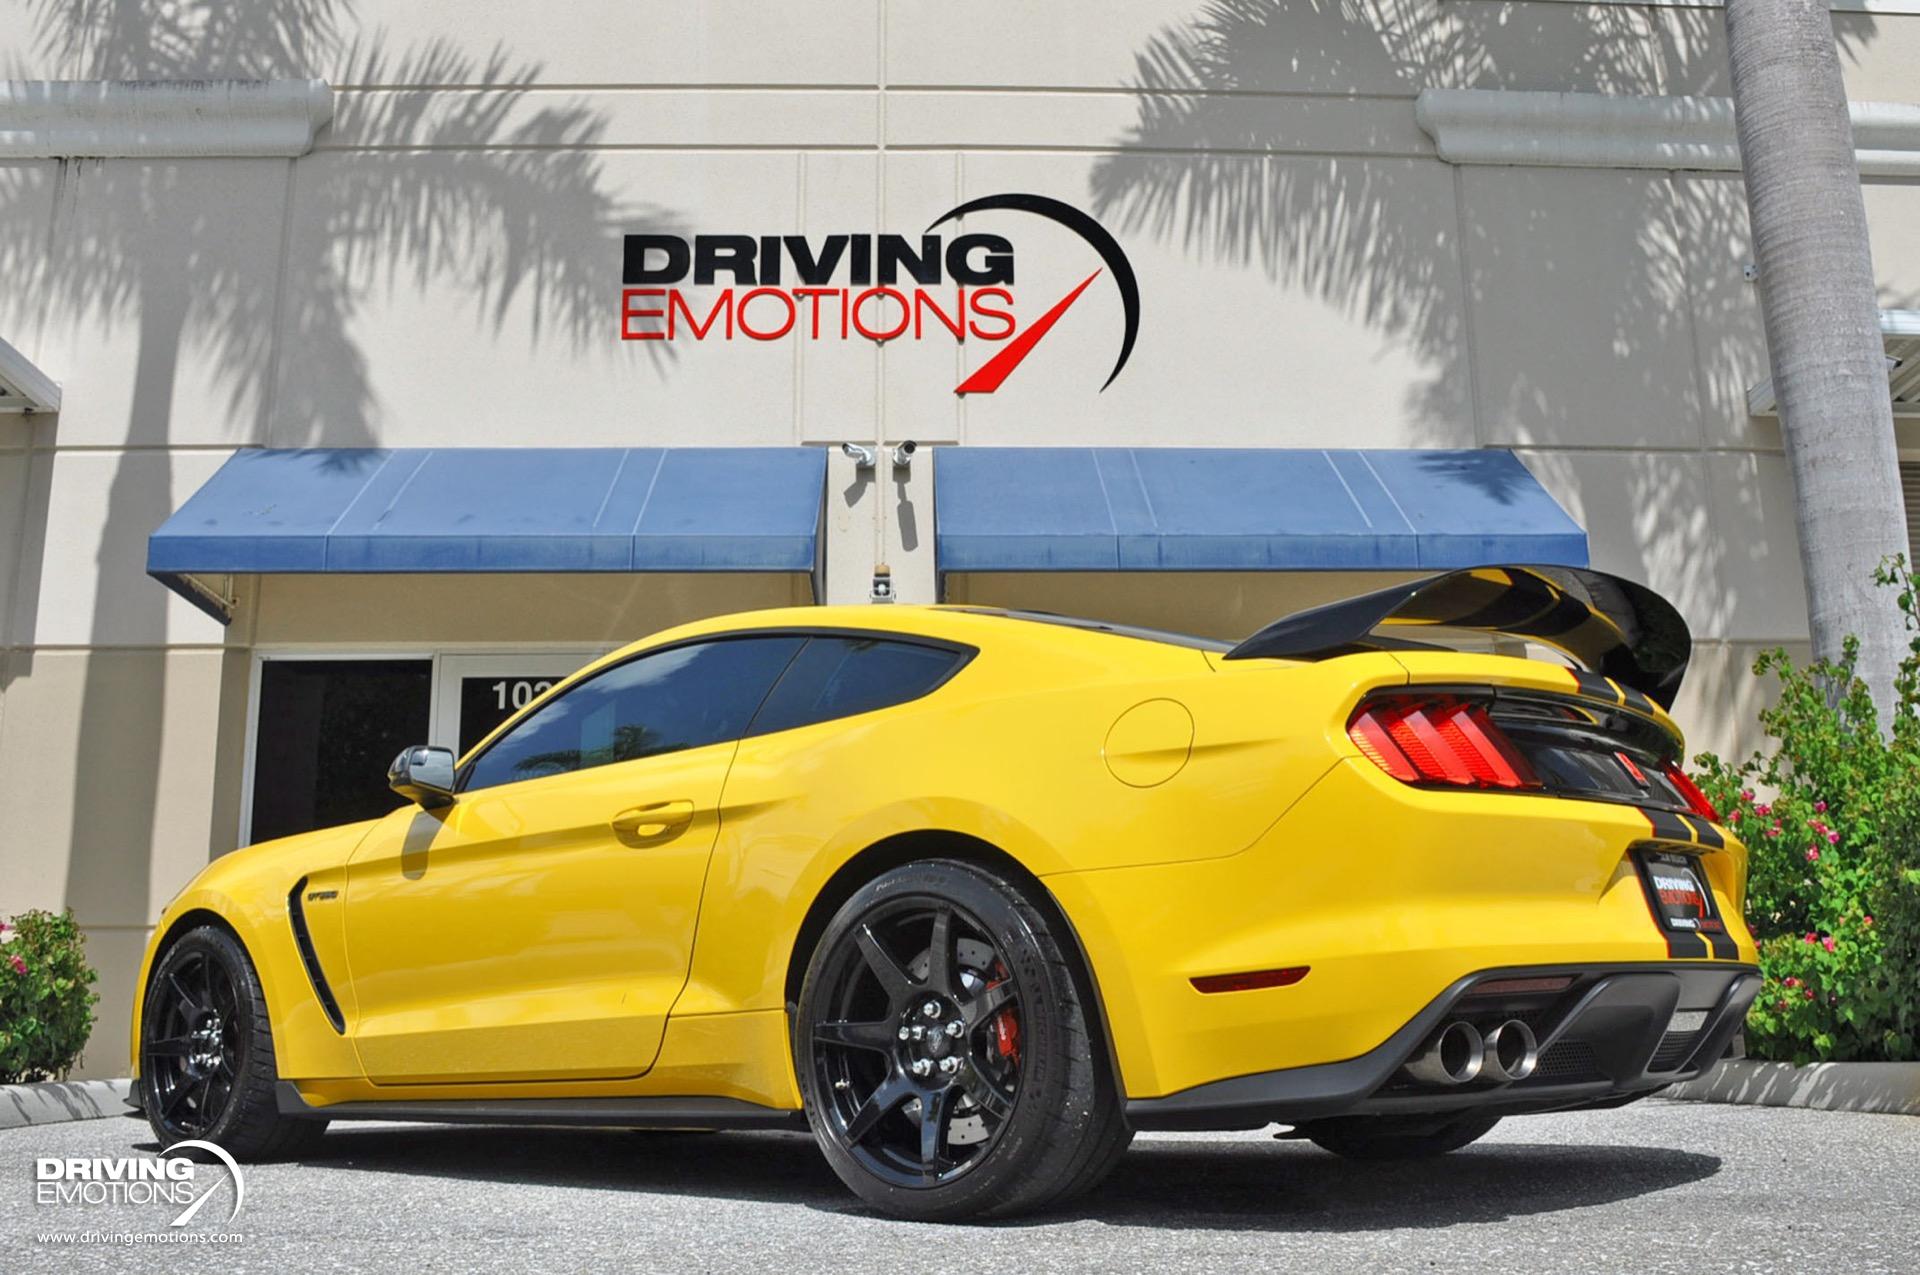 Used 2017 Ford Mustang Shelby GT350R Shelby GT350R TRIPLE YELLOW! R ELECTRONICS PACKAGE! RARE!! | Lake Park, FL